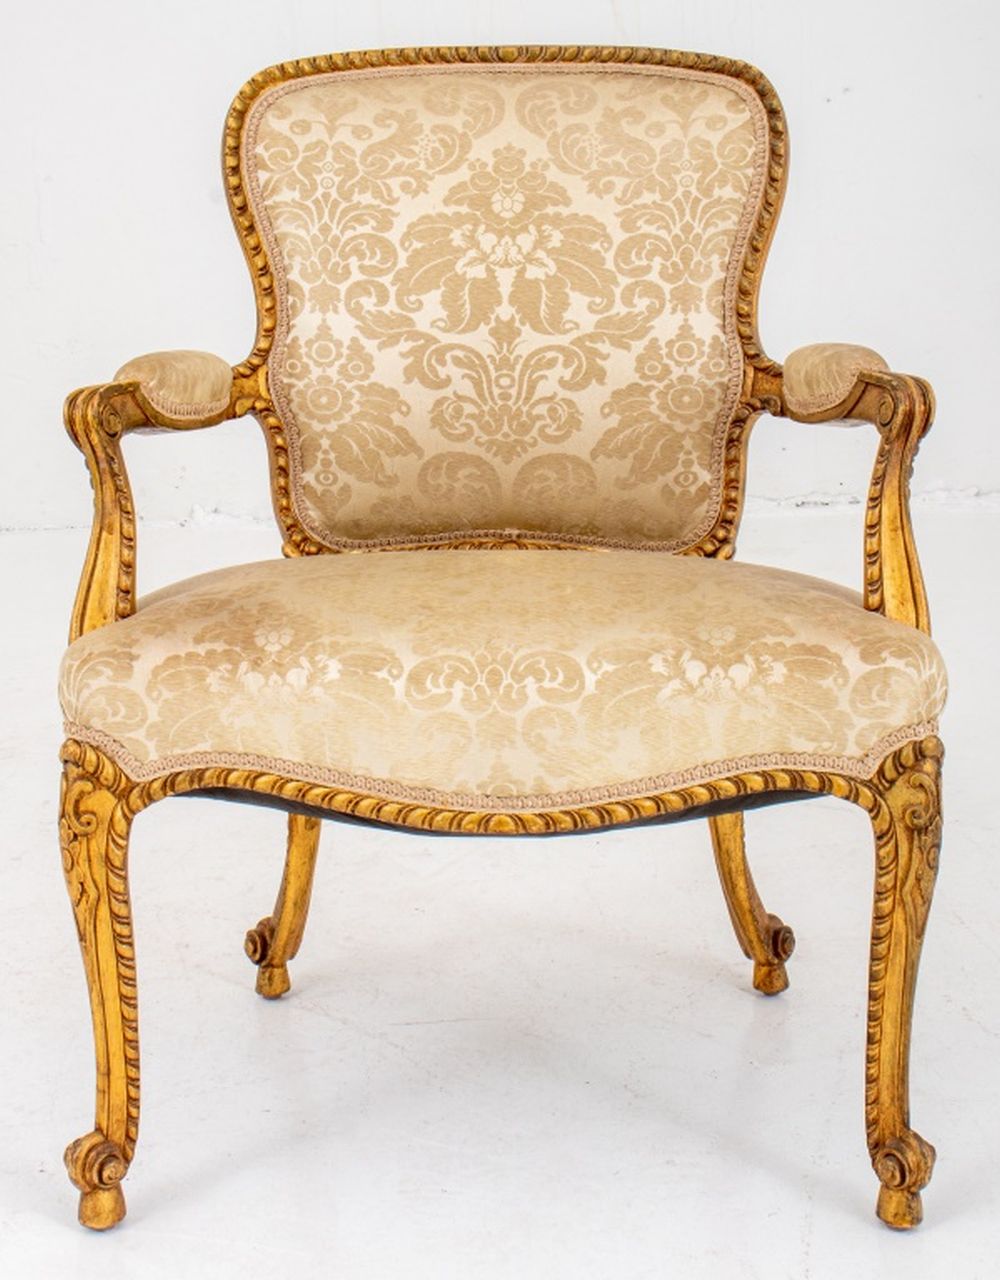 GEORGE III STYLE FRENCH MANNER 2bc35b